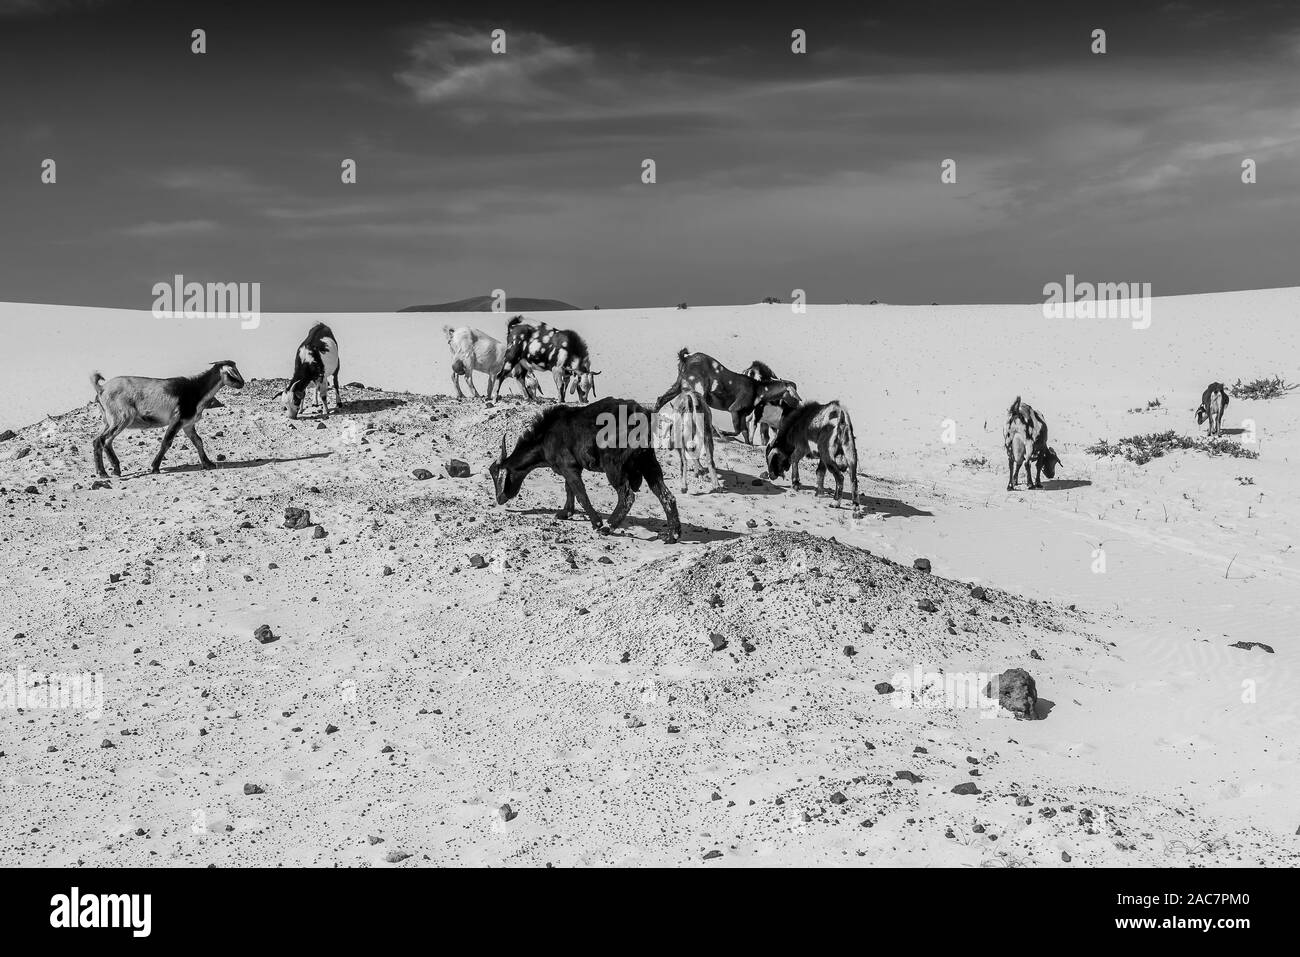 Black and white view of a group of typical goats grazing on the famous dunes of Corralejo, Fuerteventura, Canary Islands, Spain Stock Photo